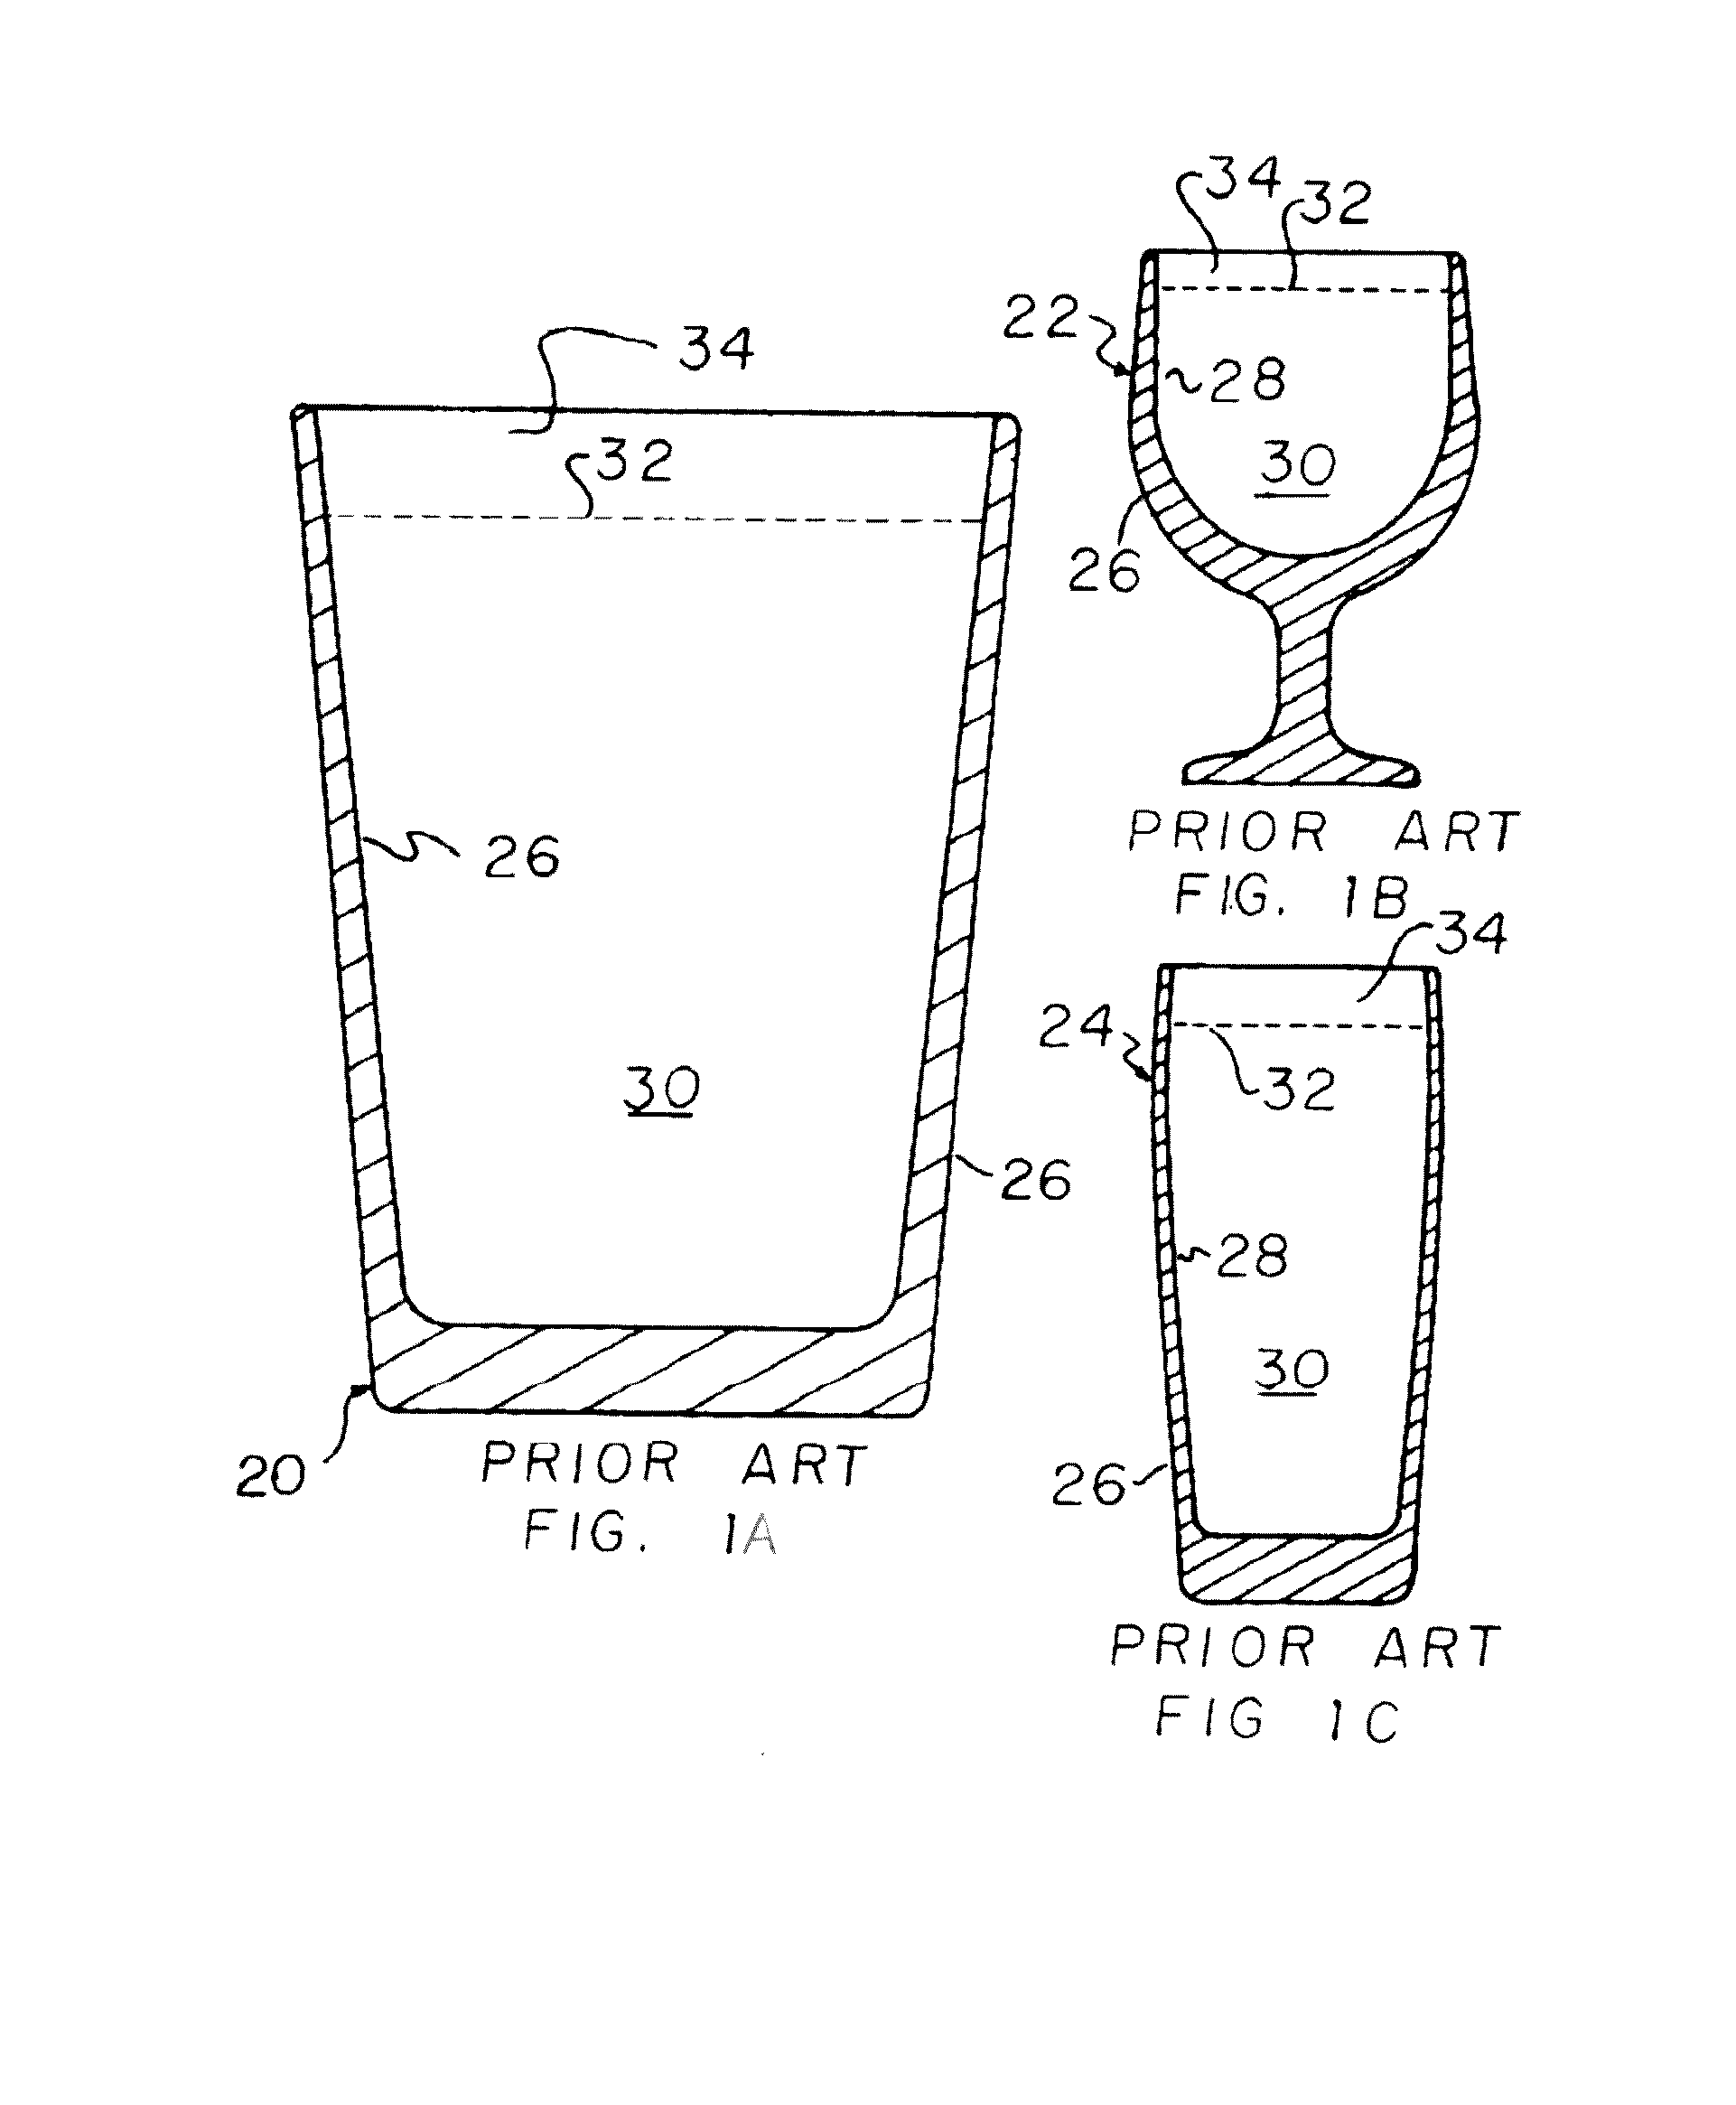 Enhanced nucleating beverage container, system and method